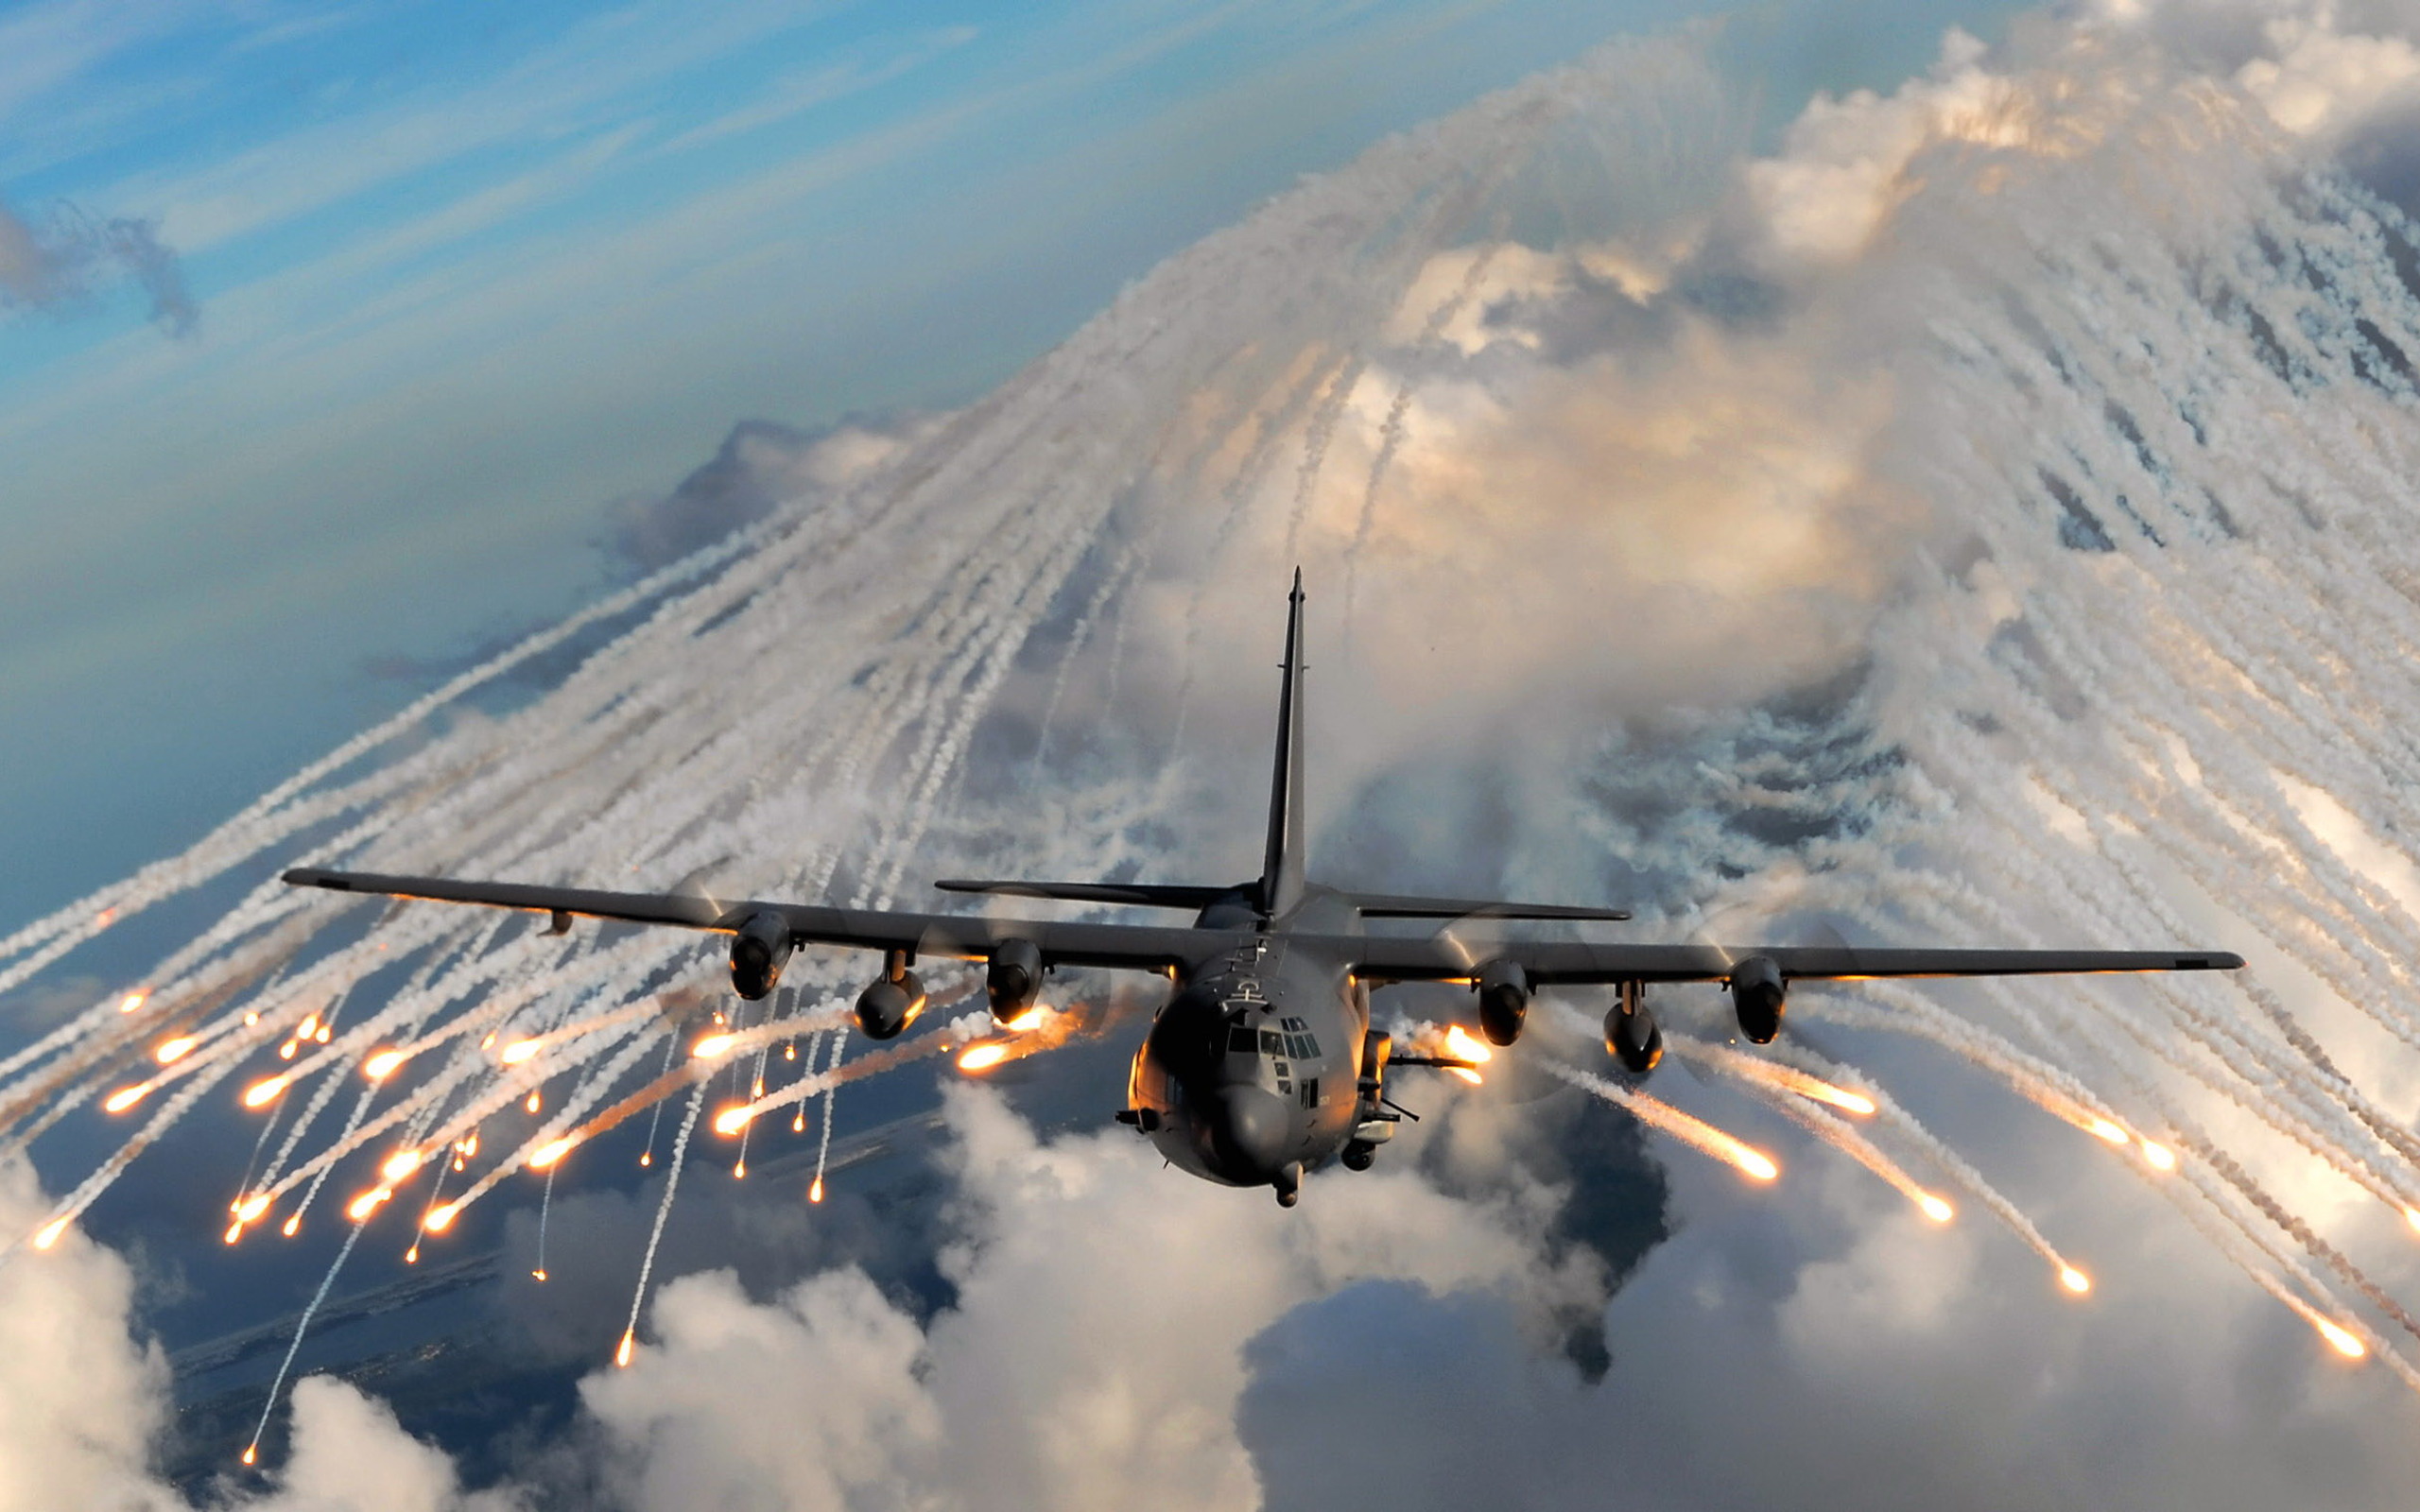 C-130 Hercules wallpapers and images - wallpapers, pictures, photos